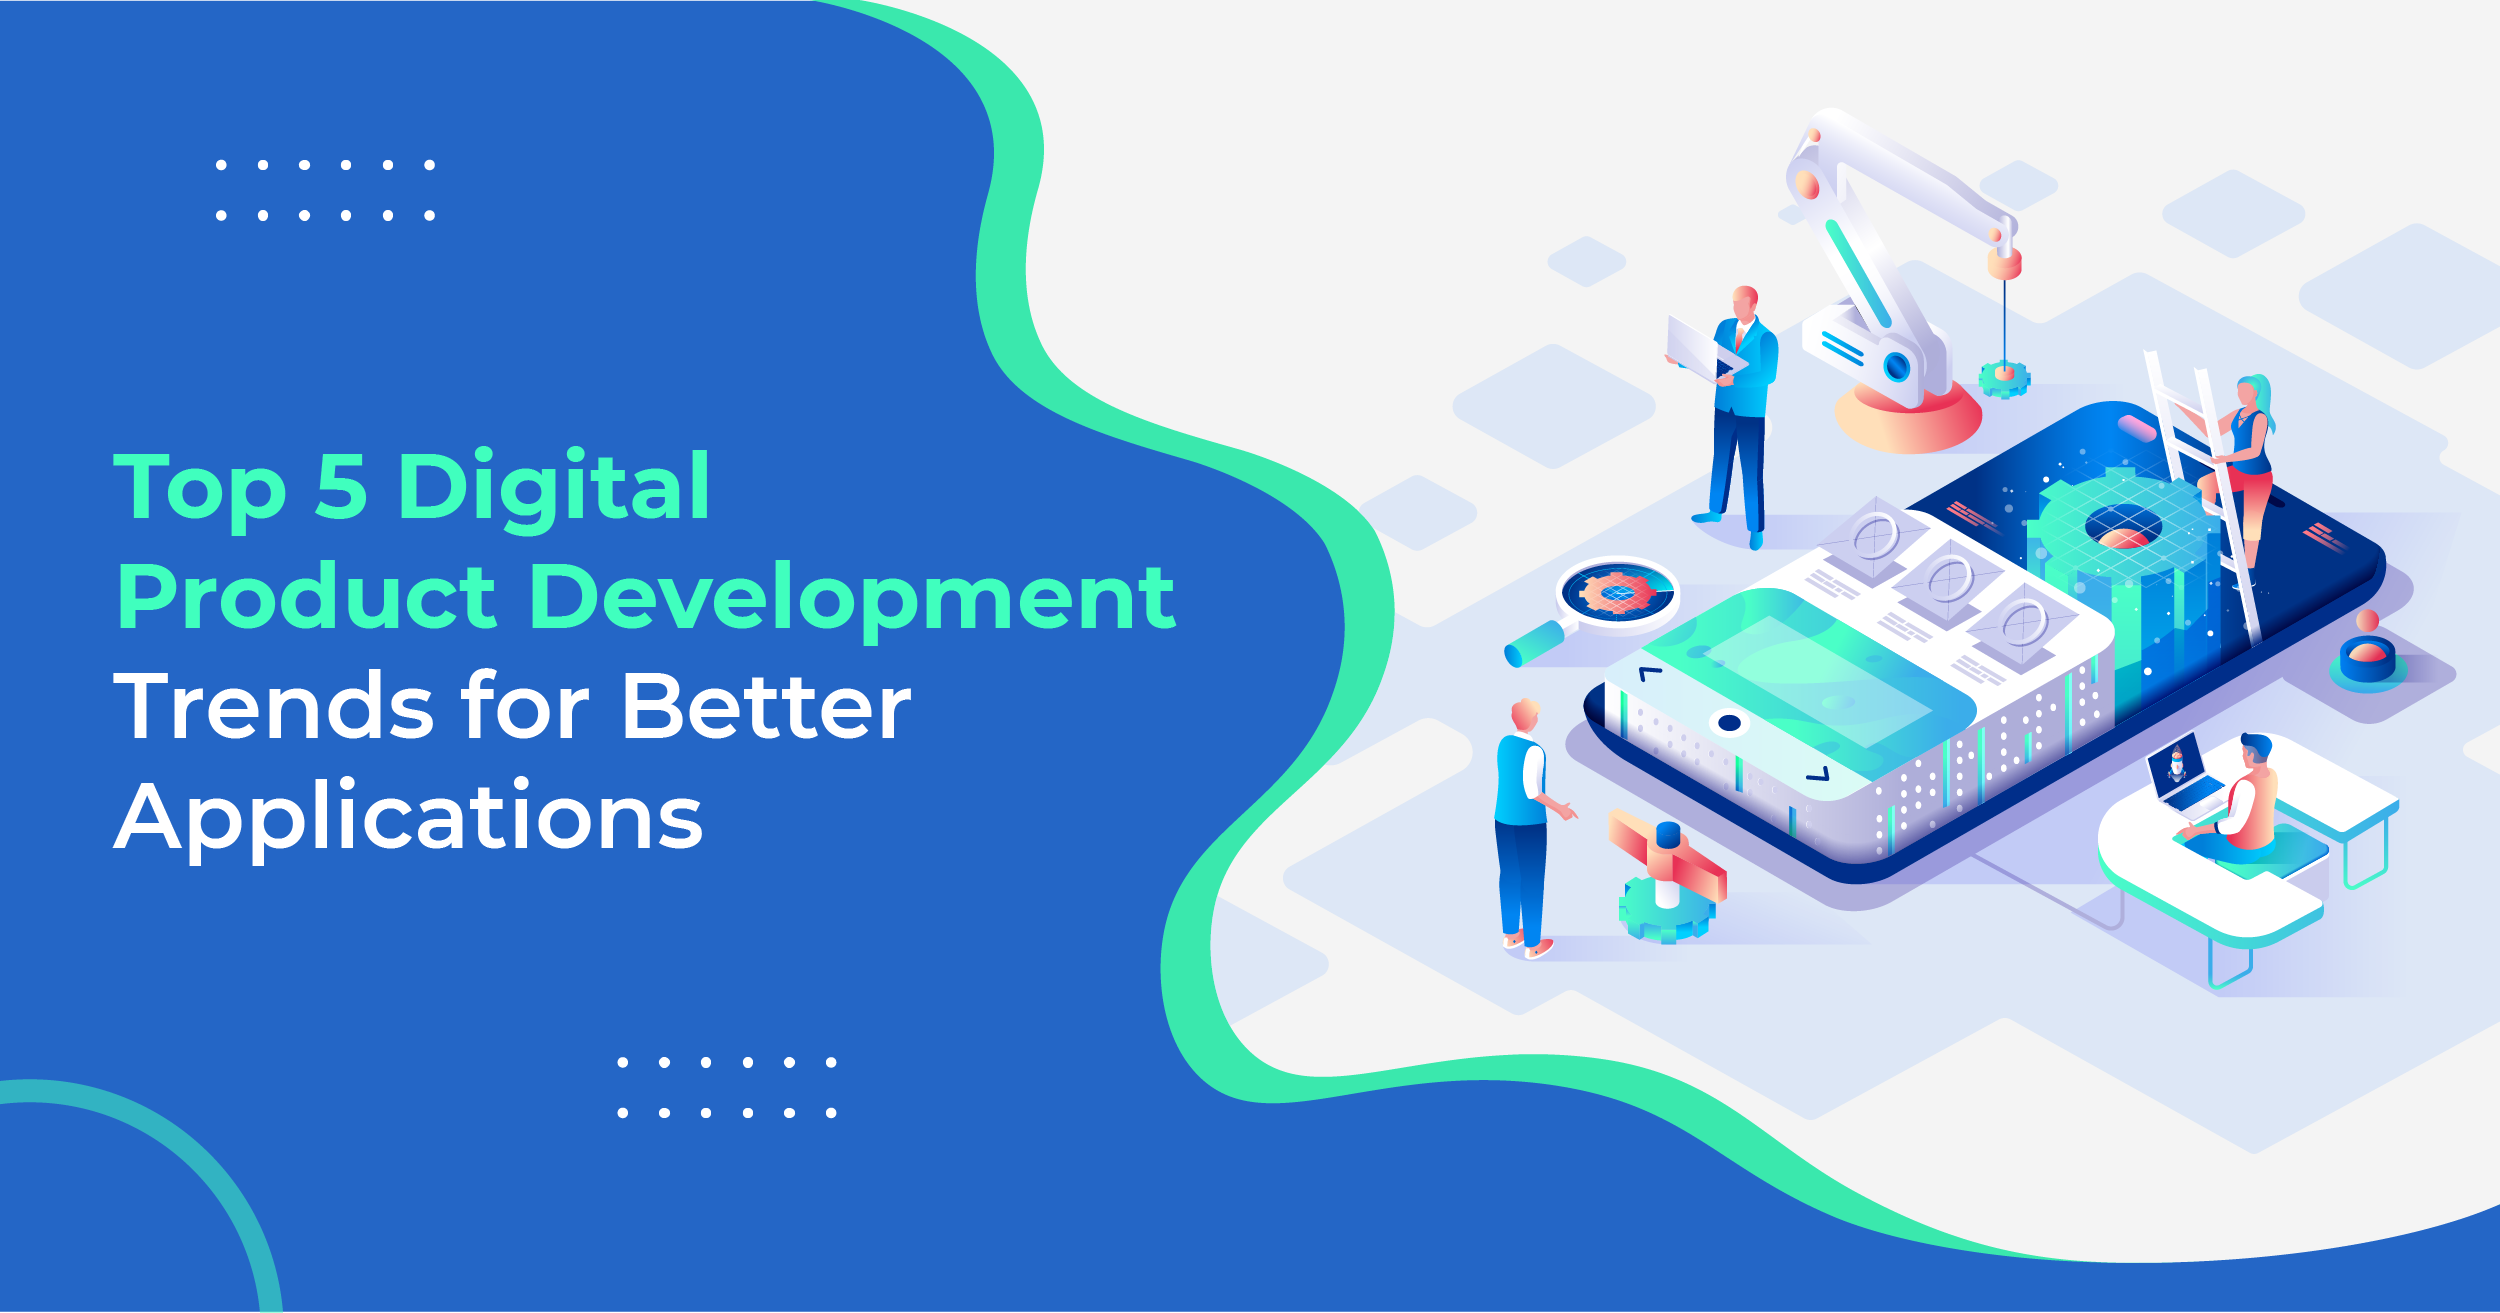 Top 5 Digital Product Development Trends for Better Applications